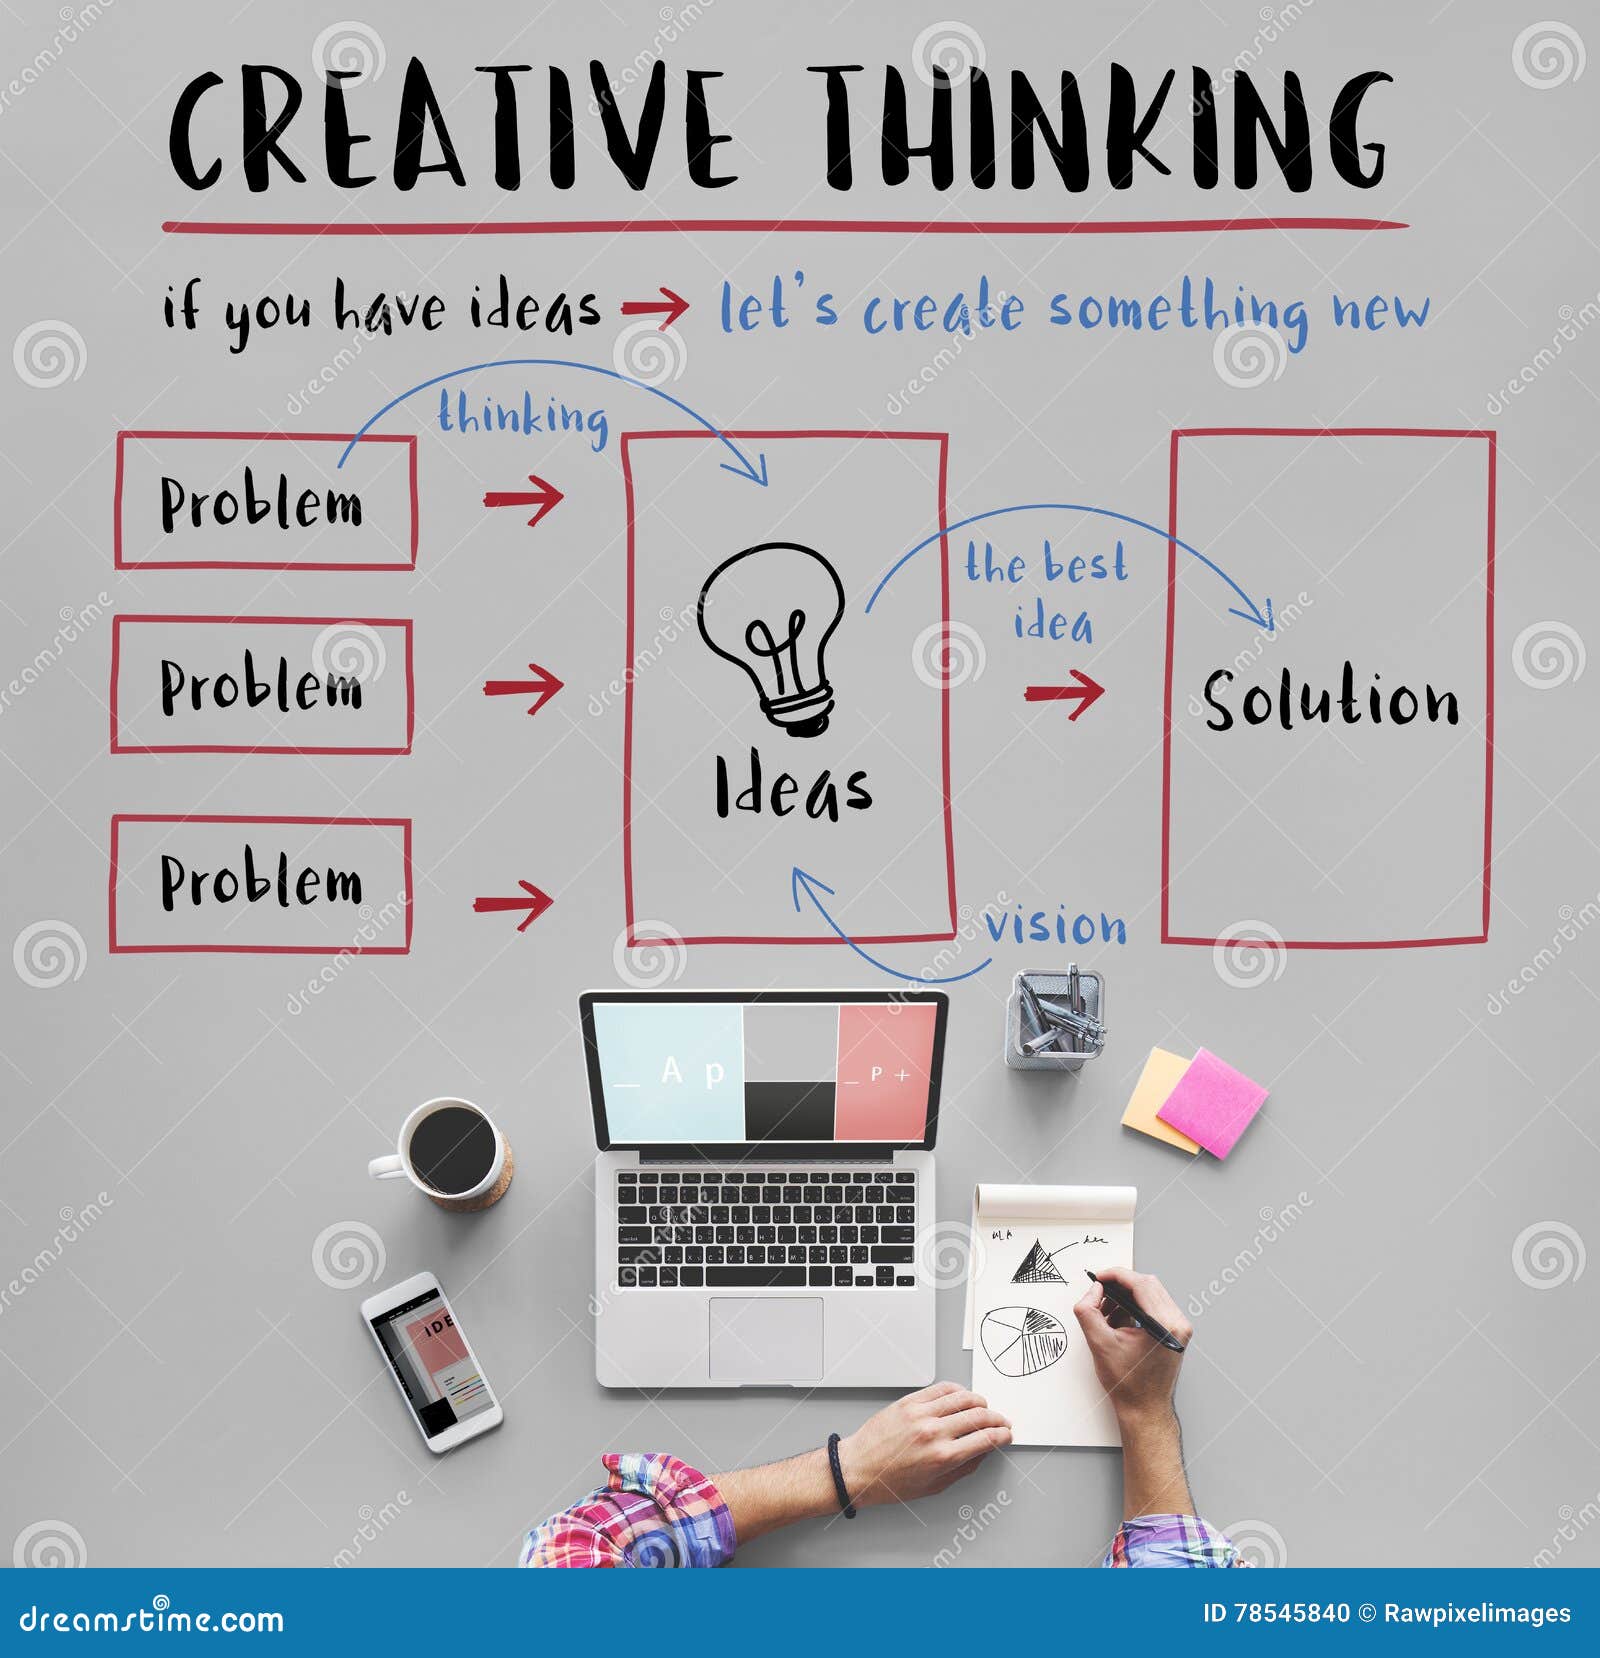 Creative Thinking Concepts – How to stimulate creative thinking?